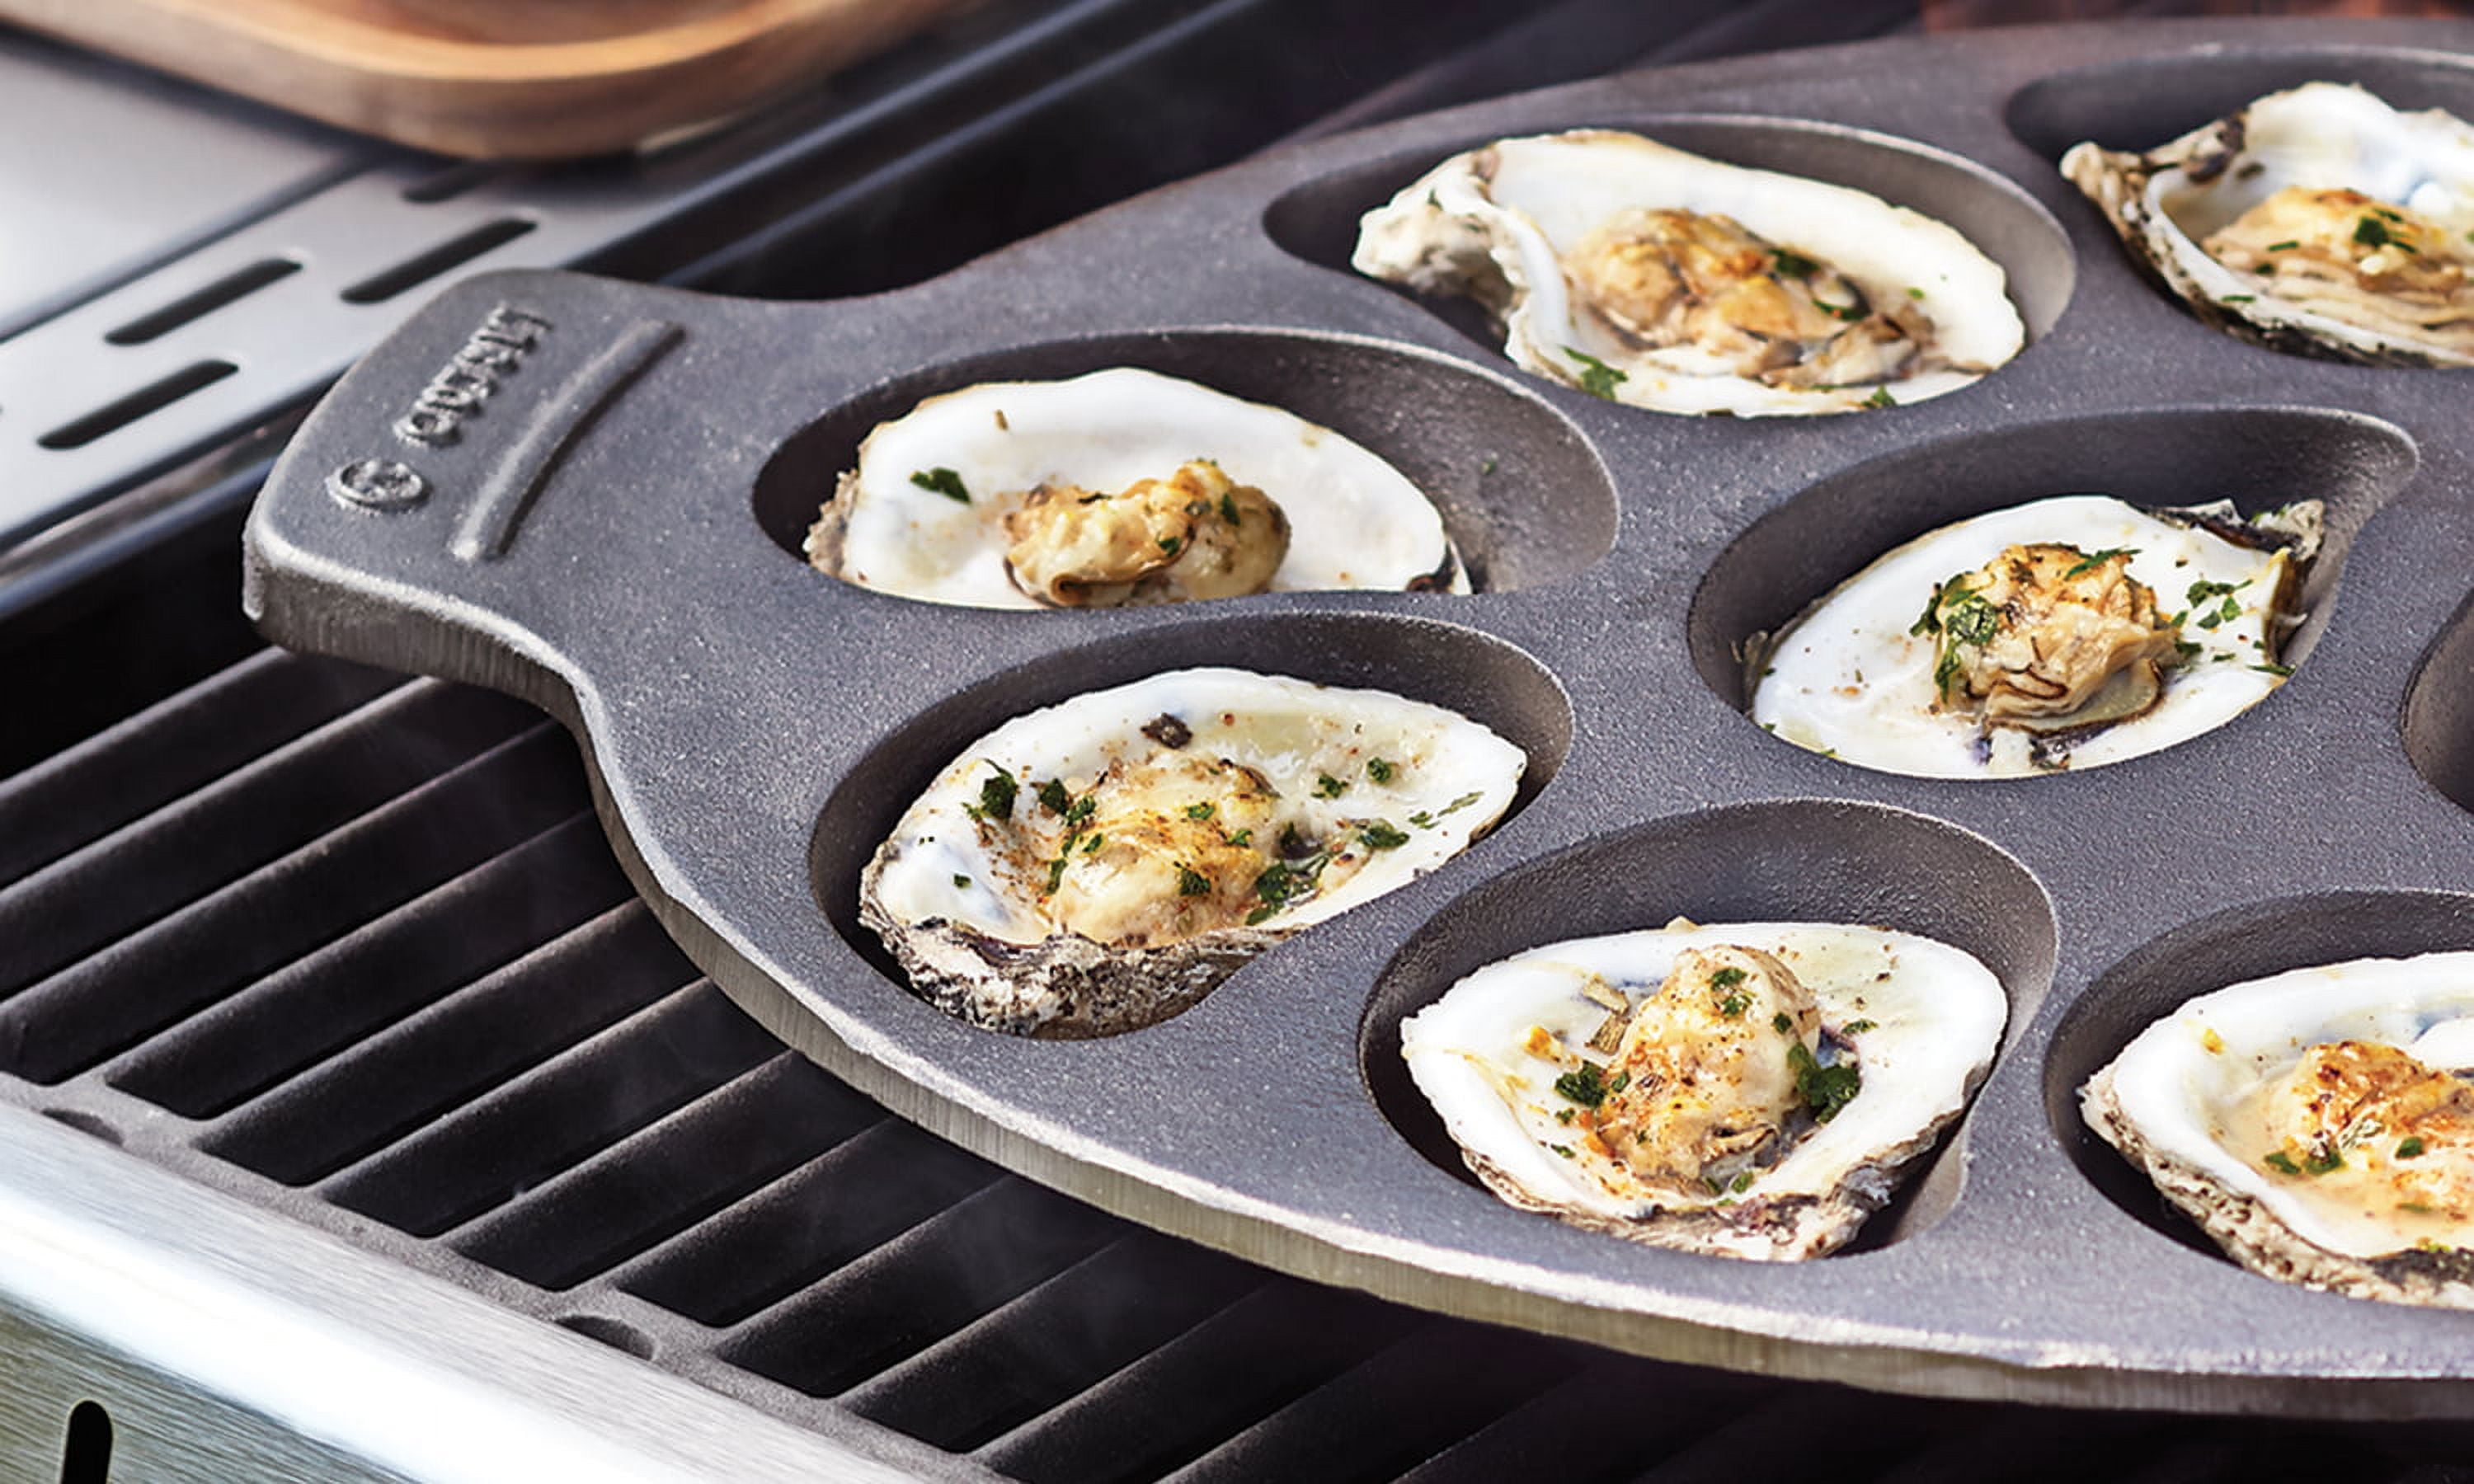 The Oyster Bed Grill Pan